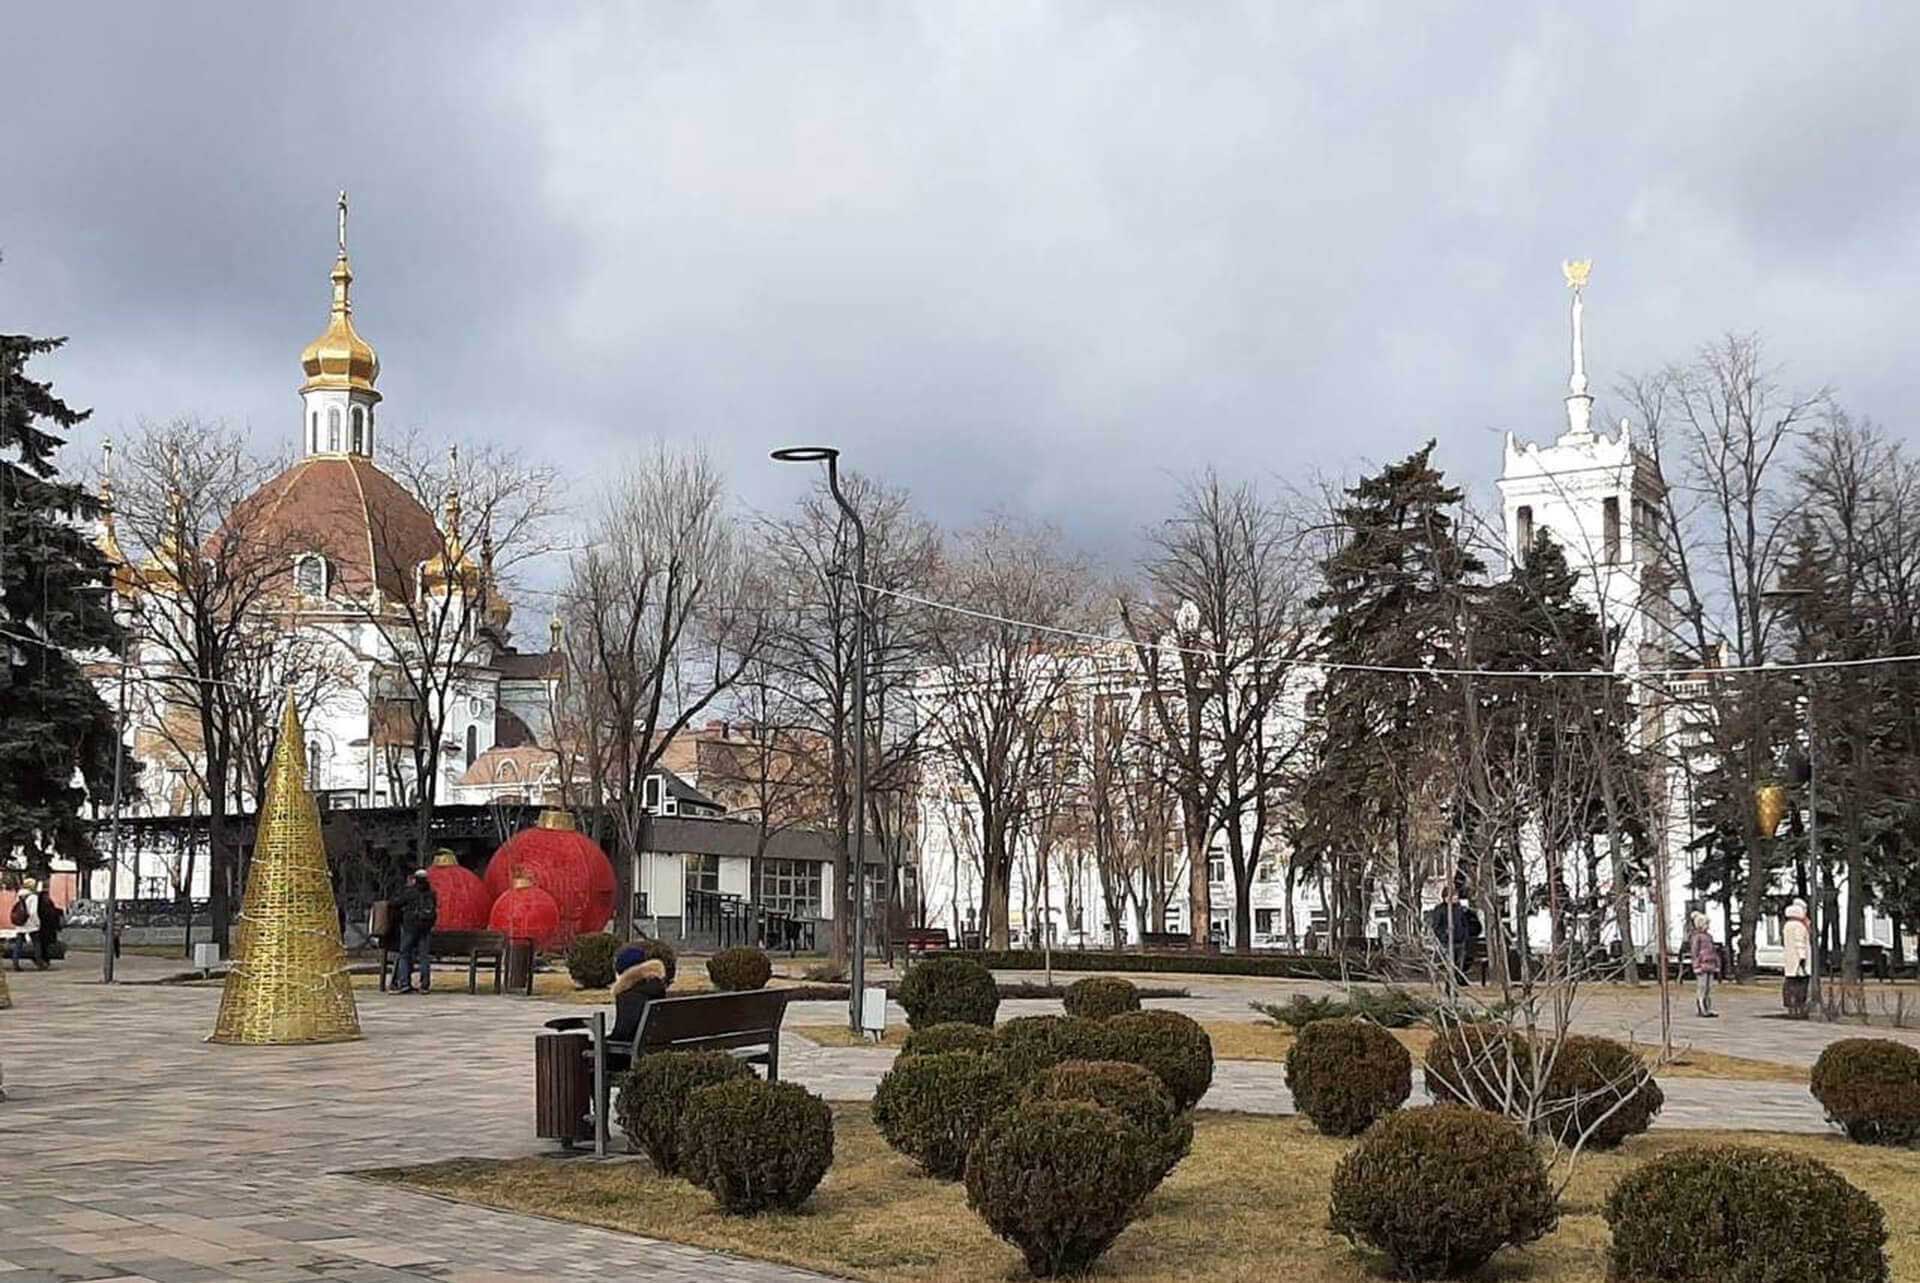 A church with a golden turret behind a landscaped plaza with topiary